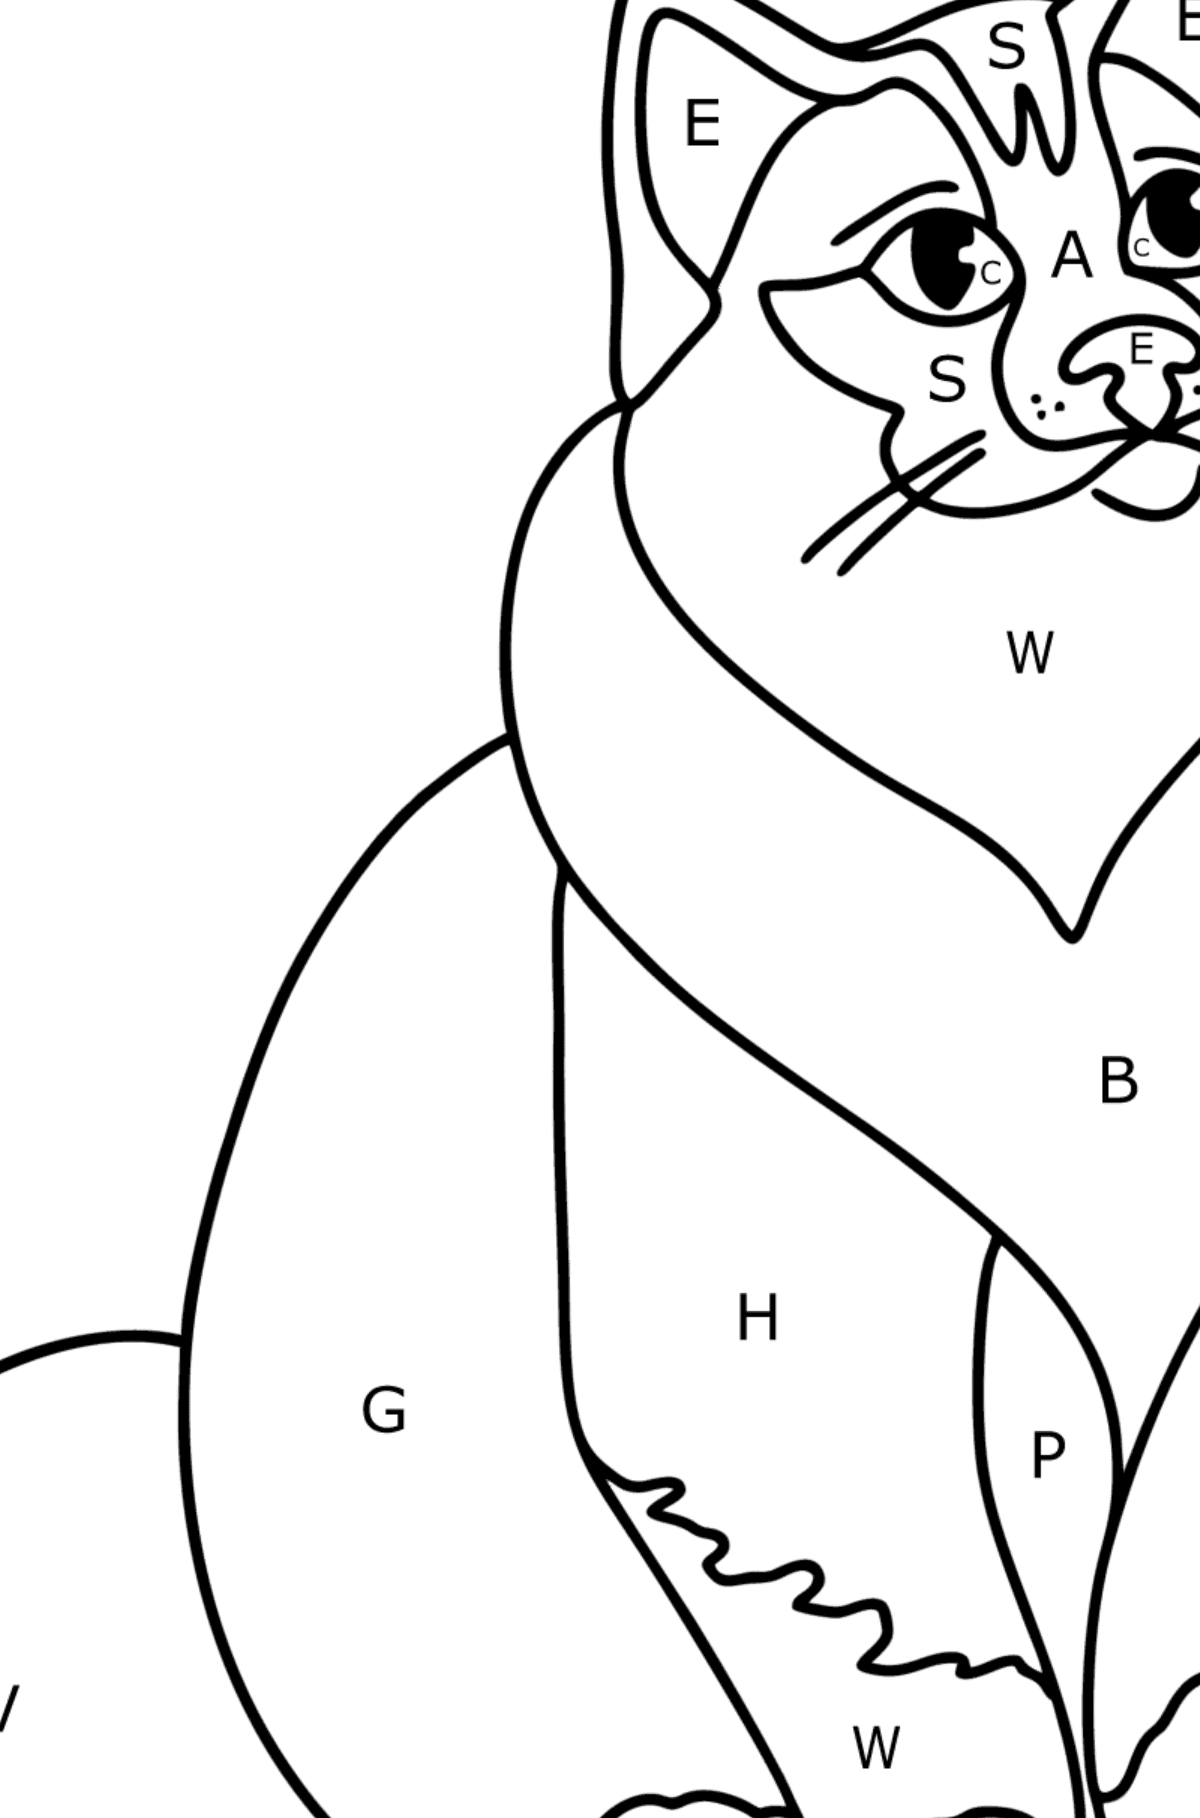 Burmese Cat coloring page - Coloring by Letters for Kids